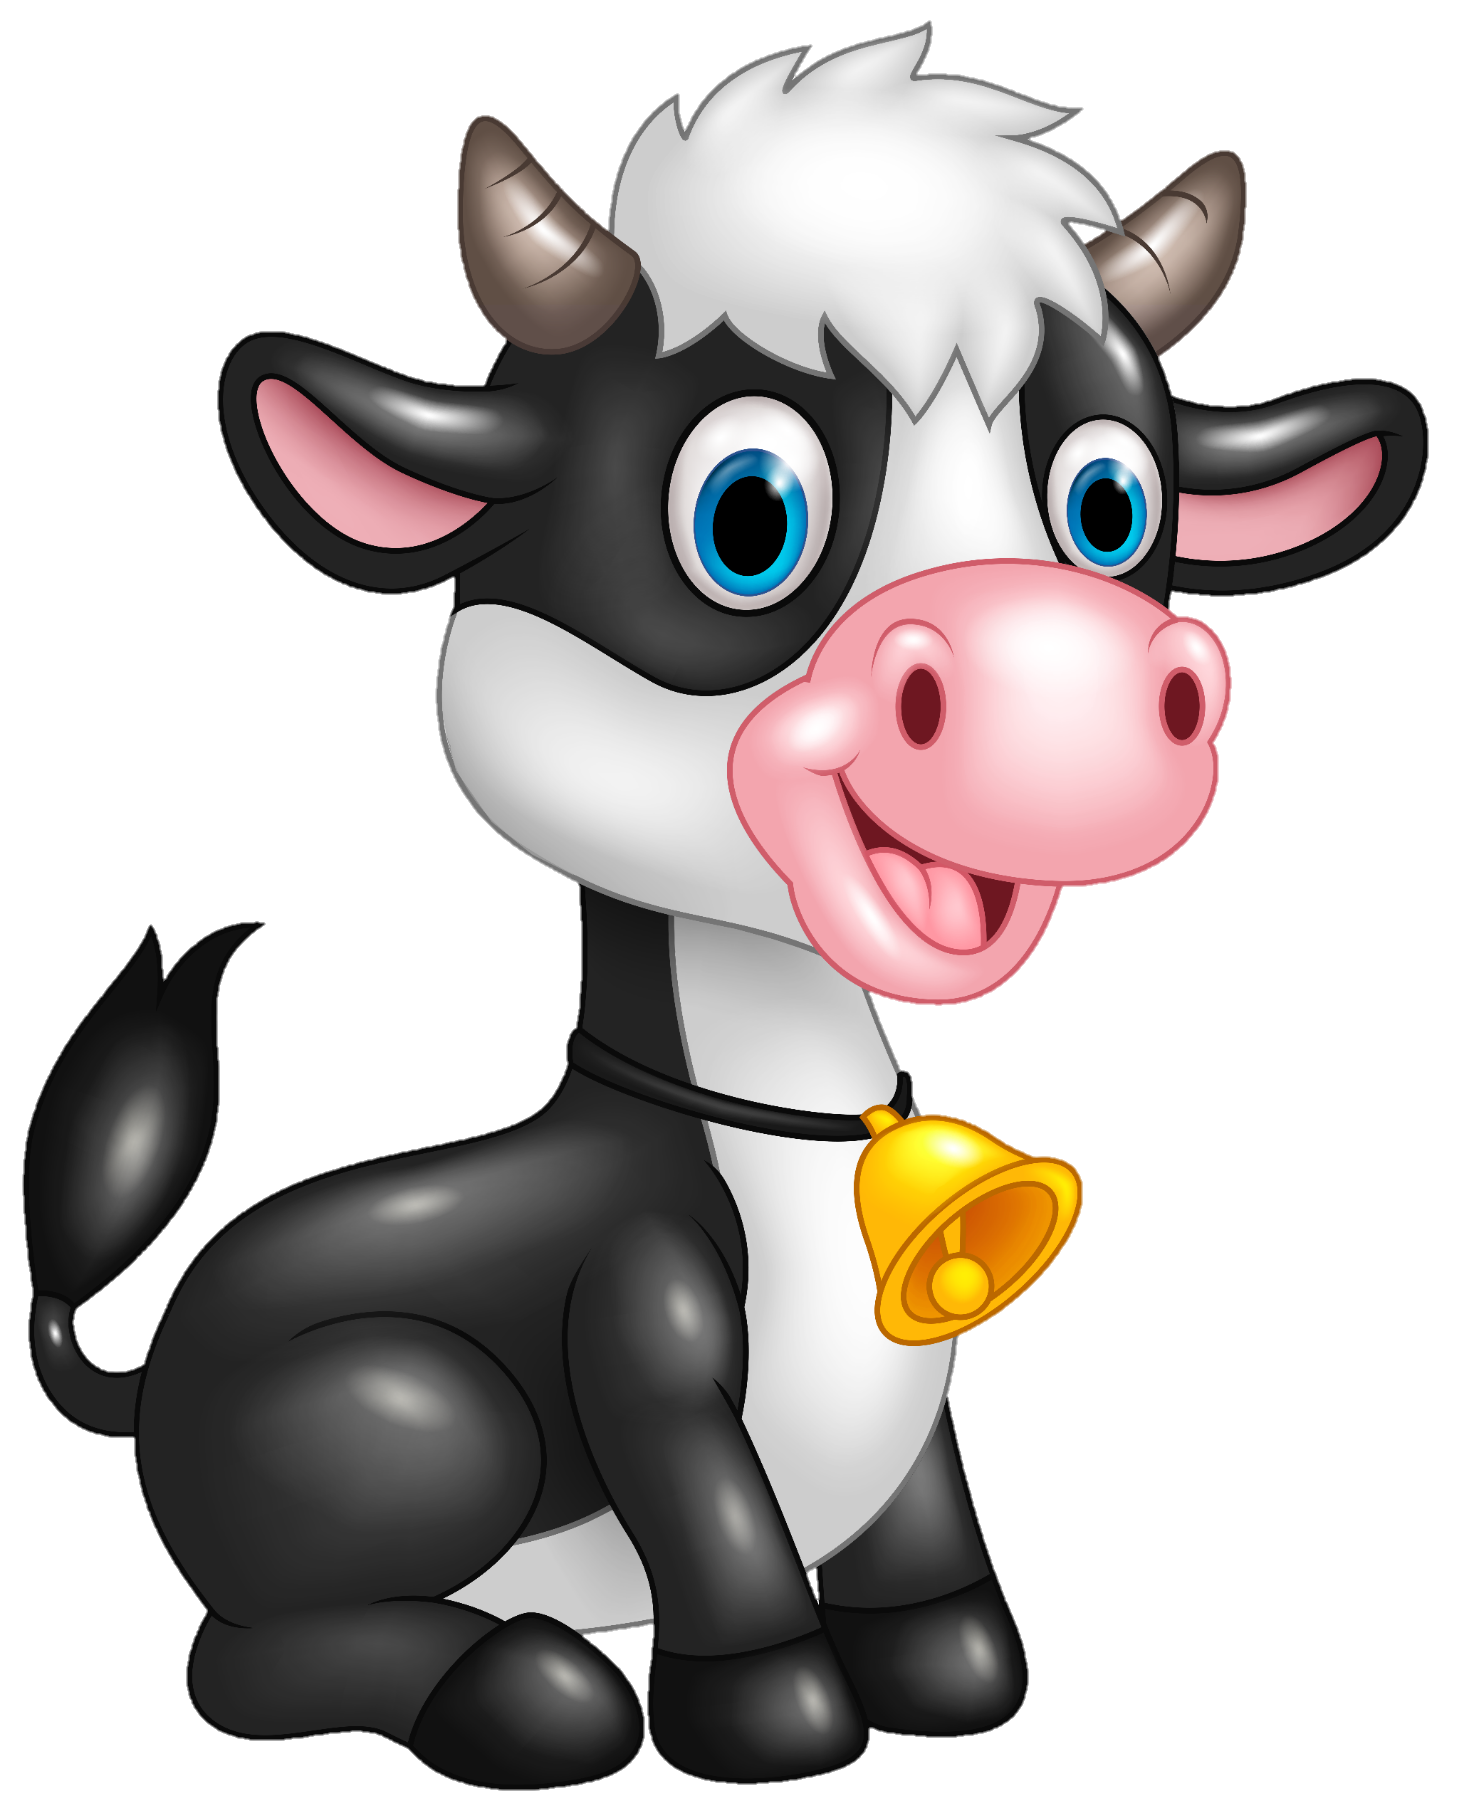 cow-png-from-pngfre-19